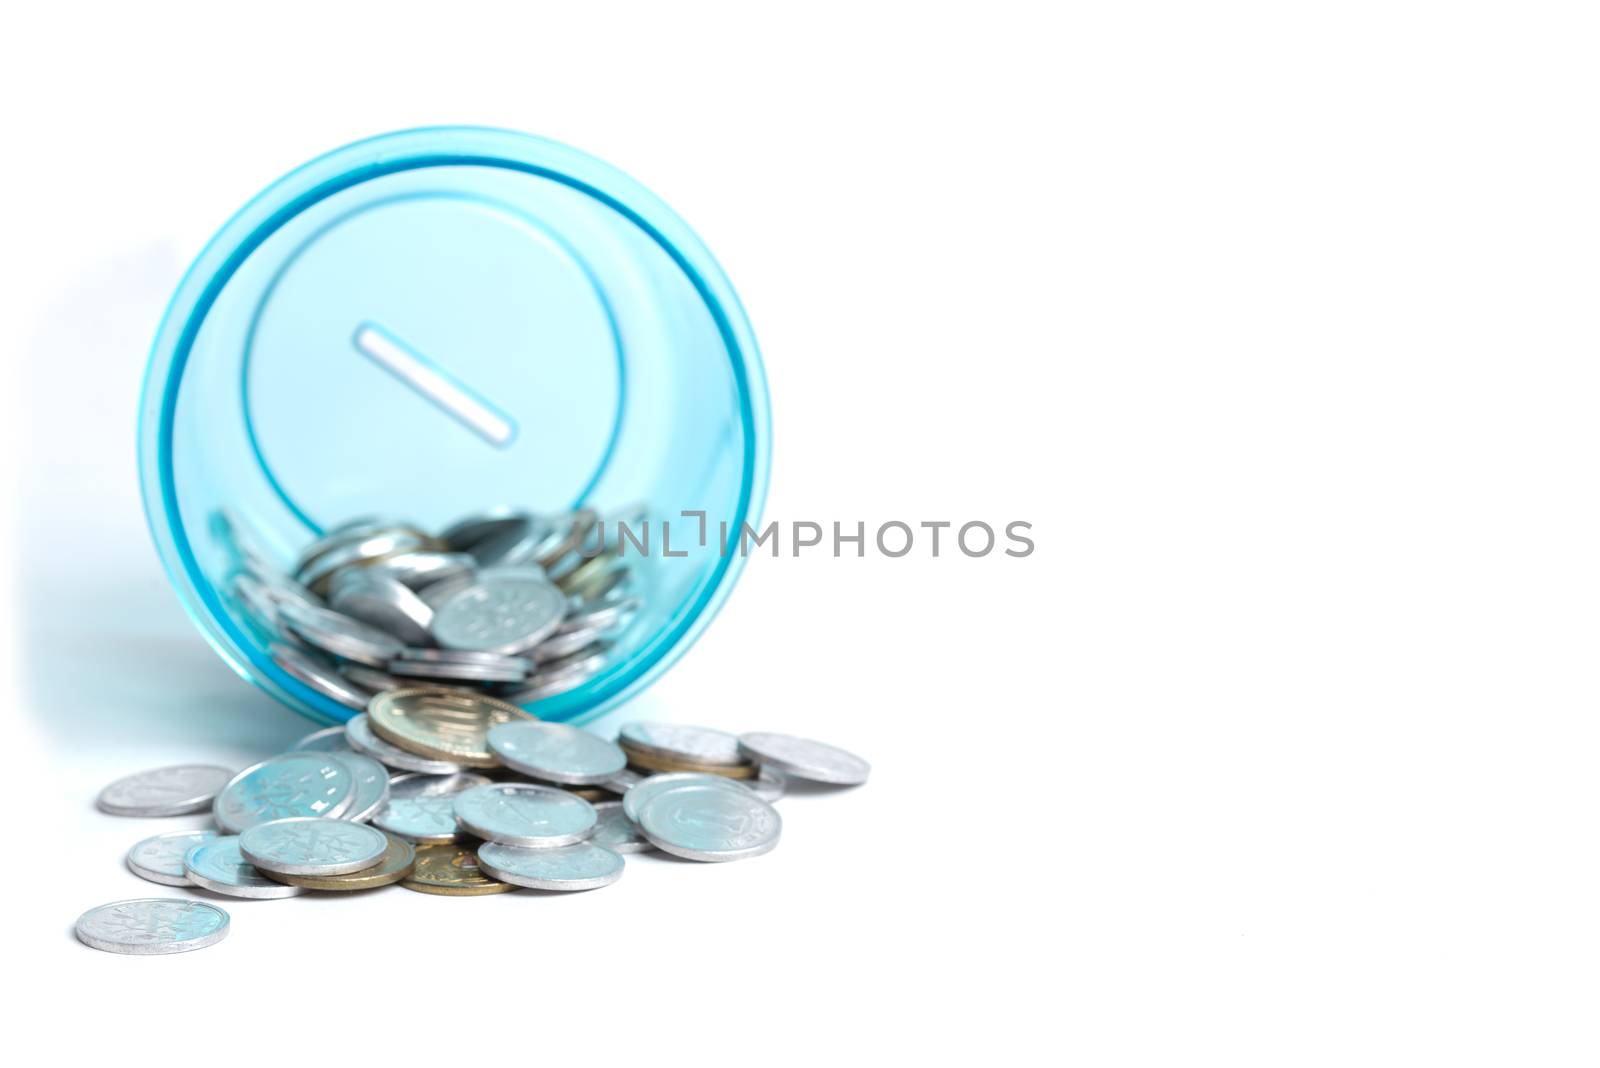 Many Japanese Yen coins pouring out of a blue bank onto a white background.